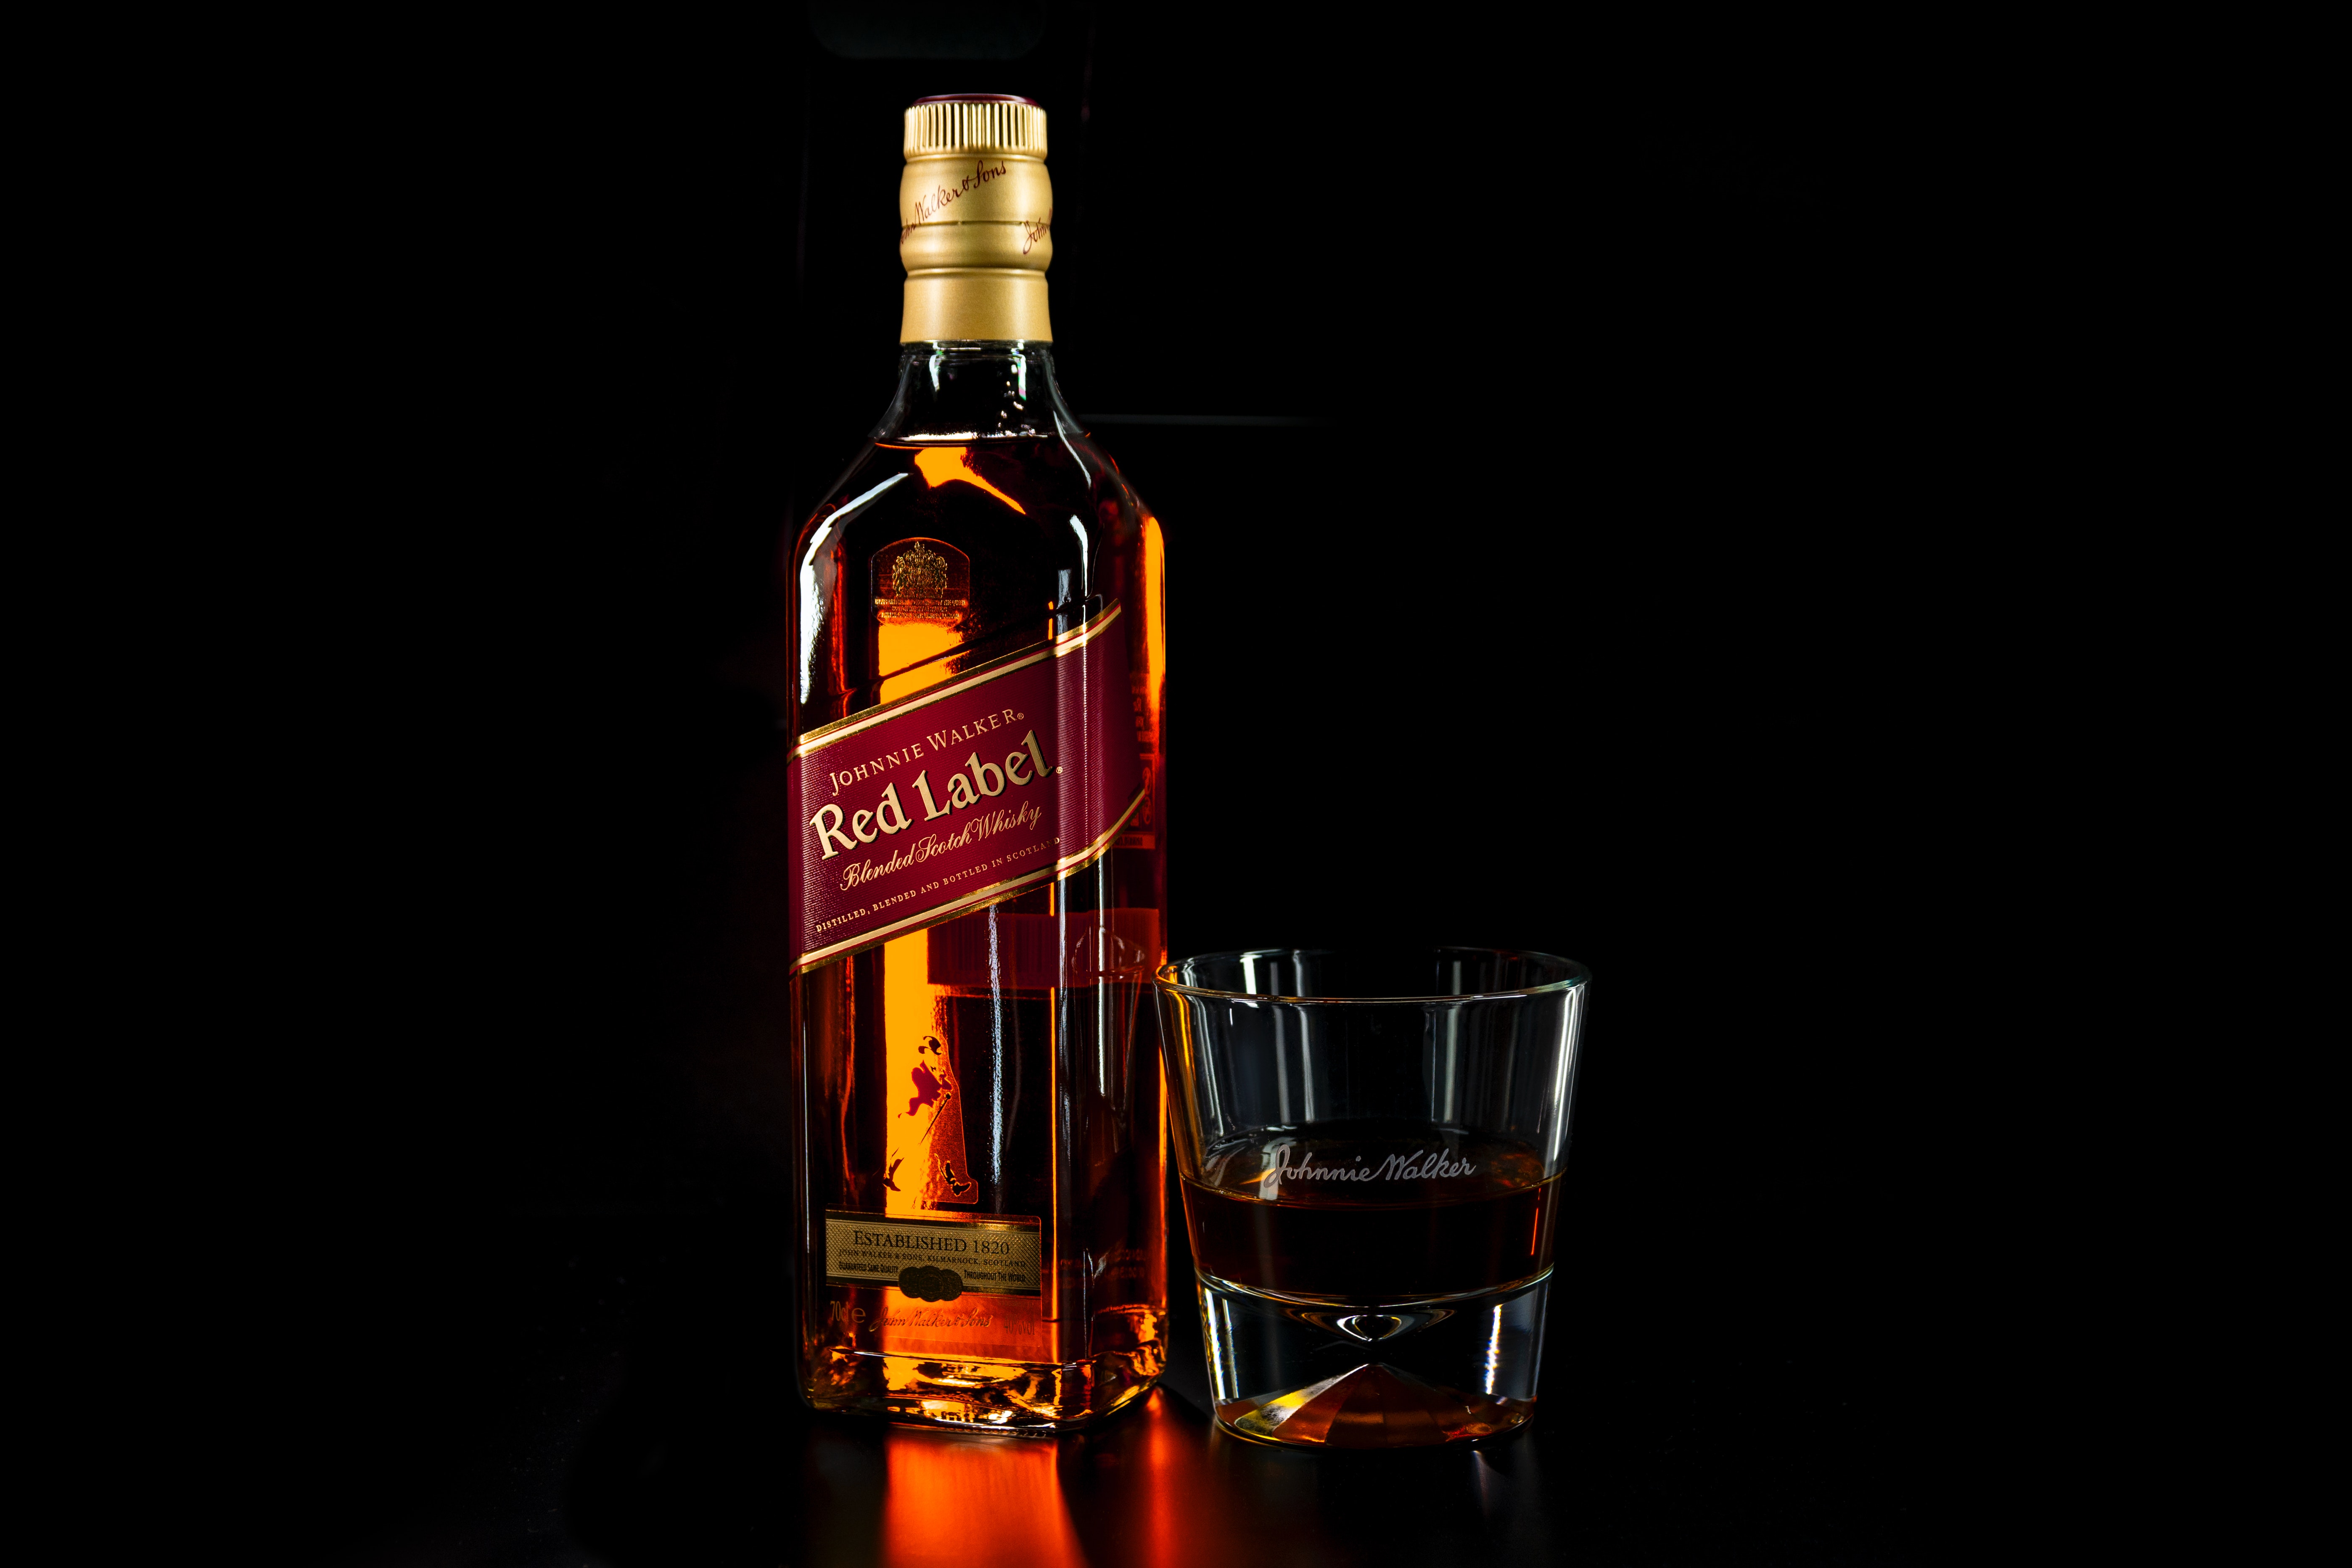 Whisky photos download the best free whisky stock photos hd images